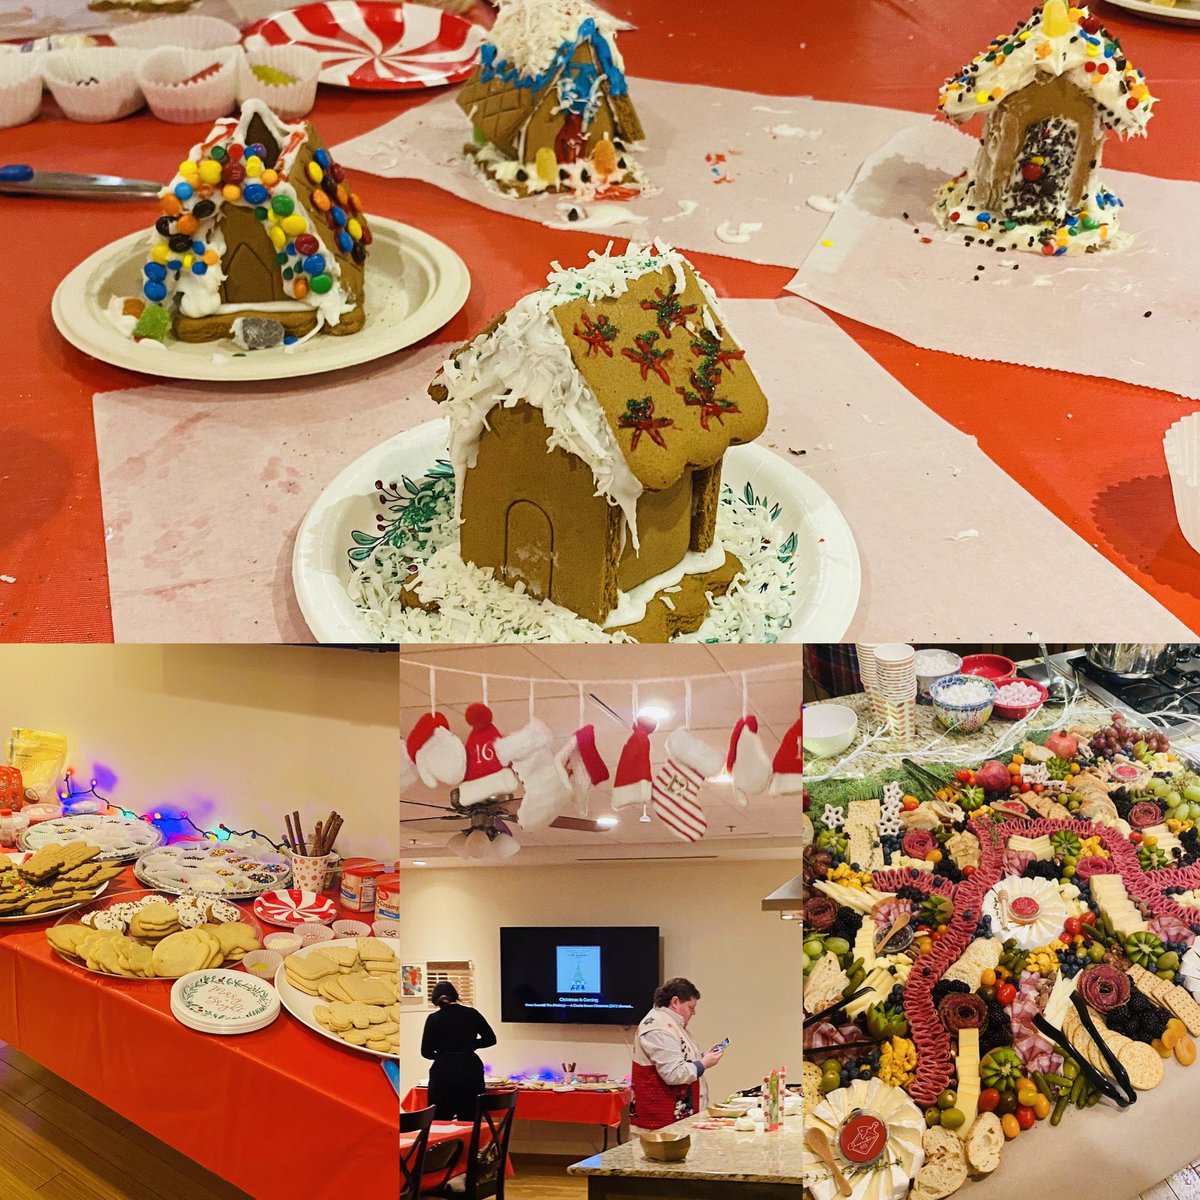 #Success! 👏🏻Wonderful @VUMC_Cancer #Youngadult #cancer program #Holiday🎄 Cookies 🍪 and #gingerbread houses to connect with others at @GildasClubMidTN last week. Several #cancerthriver shared their story. 🙏🏻to the AMAZING program manager Brittany! @VUMCDiscoveries @VUMCHemOnc